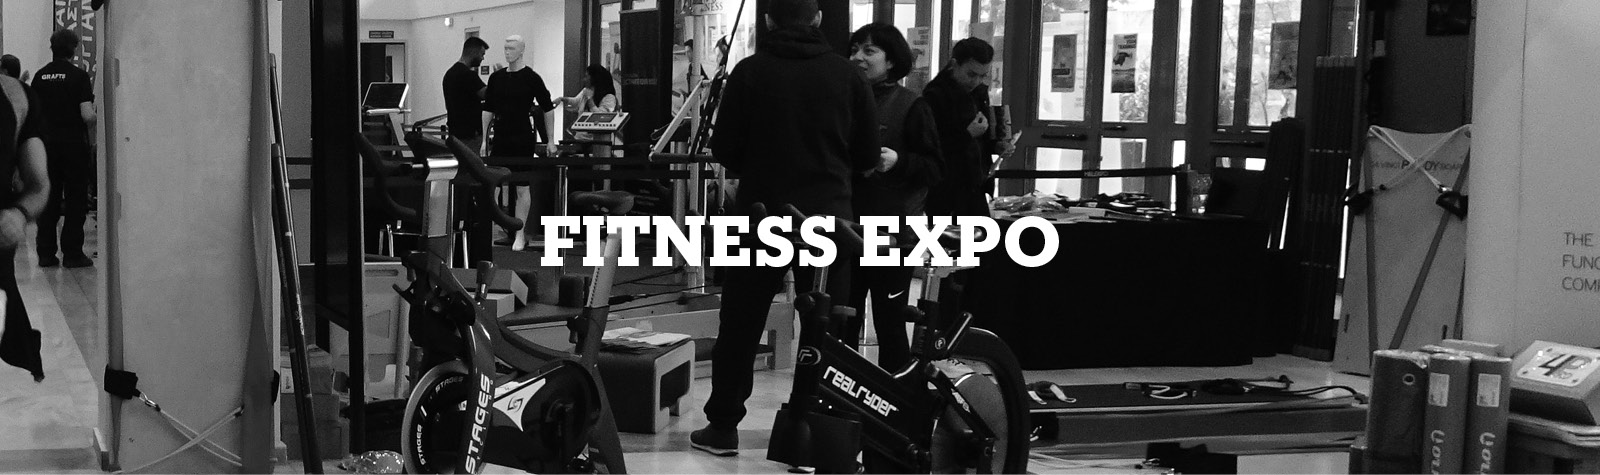 28th IHFC by Grafts Hellas - Fitness Expo banner